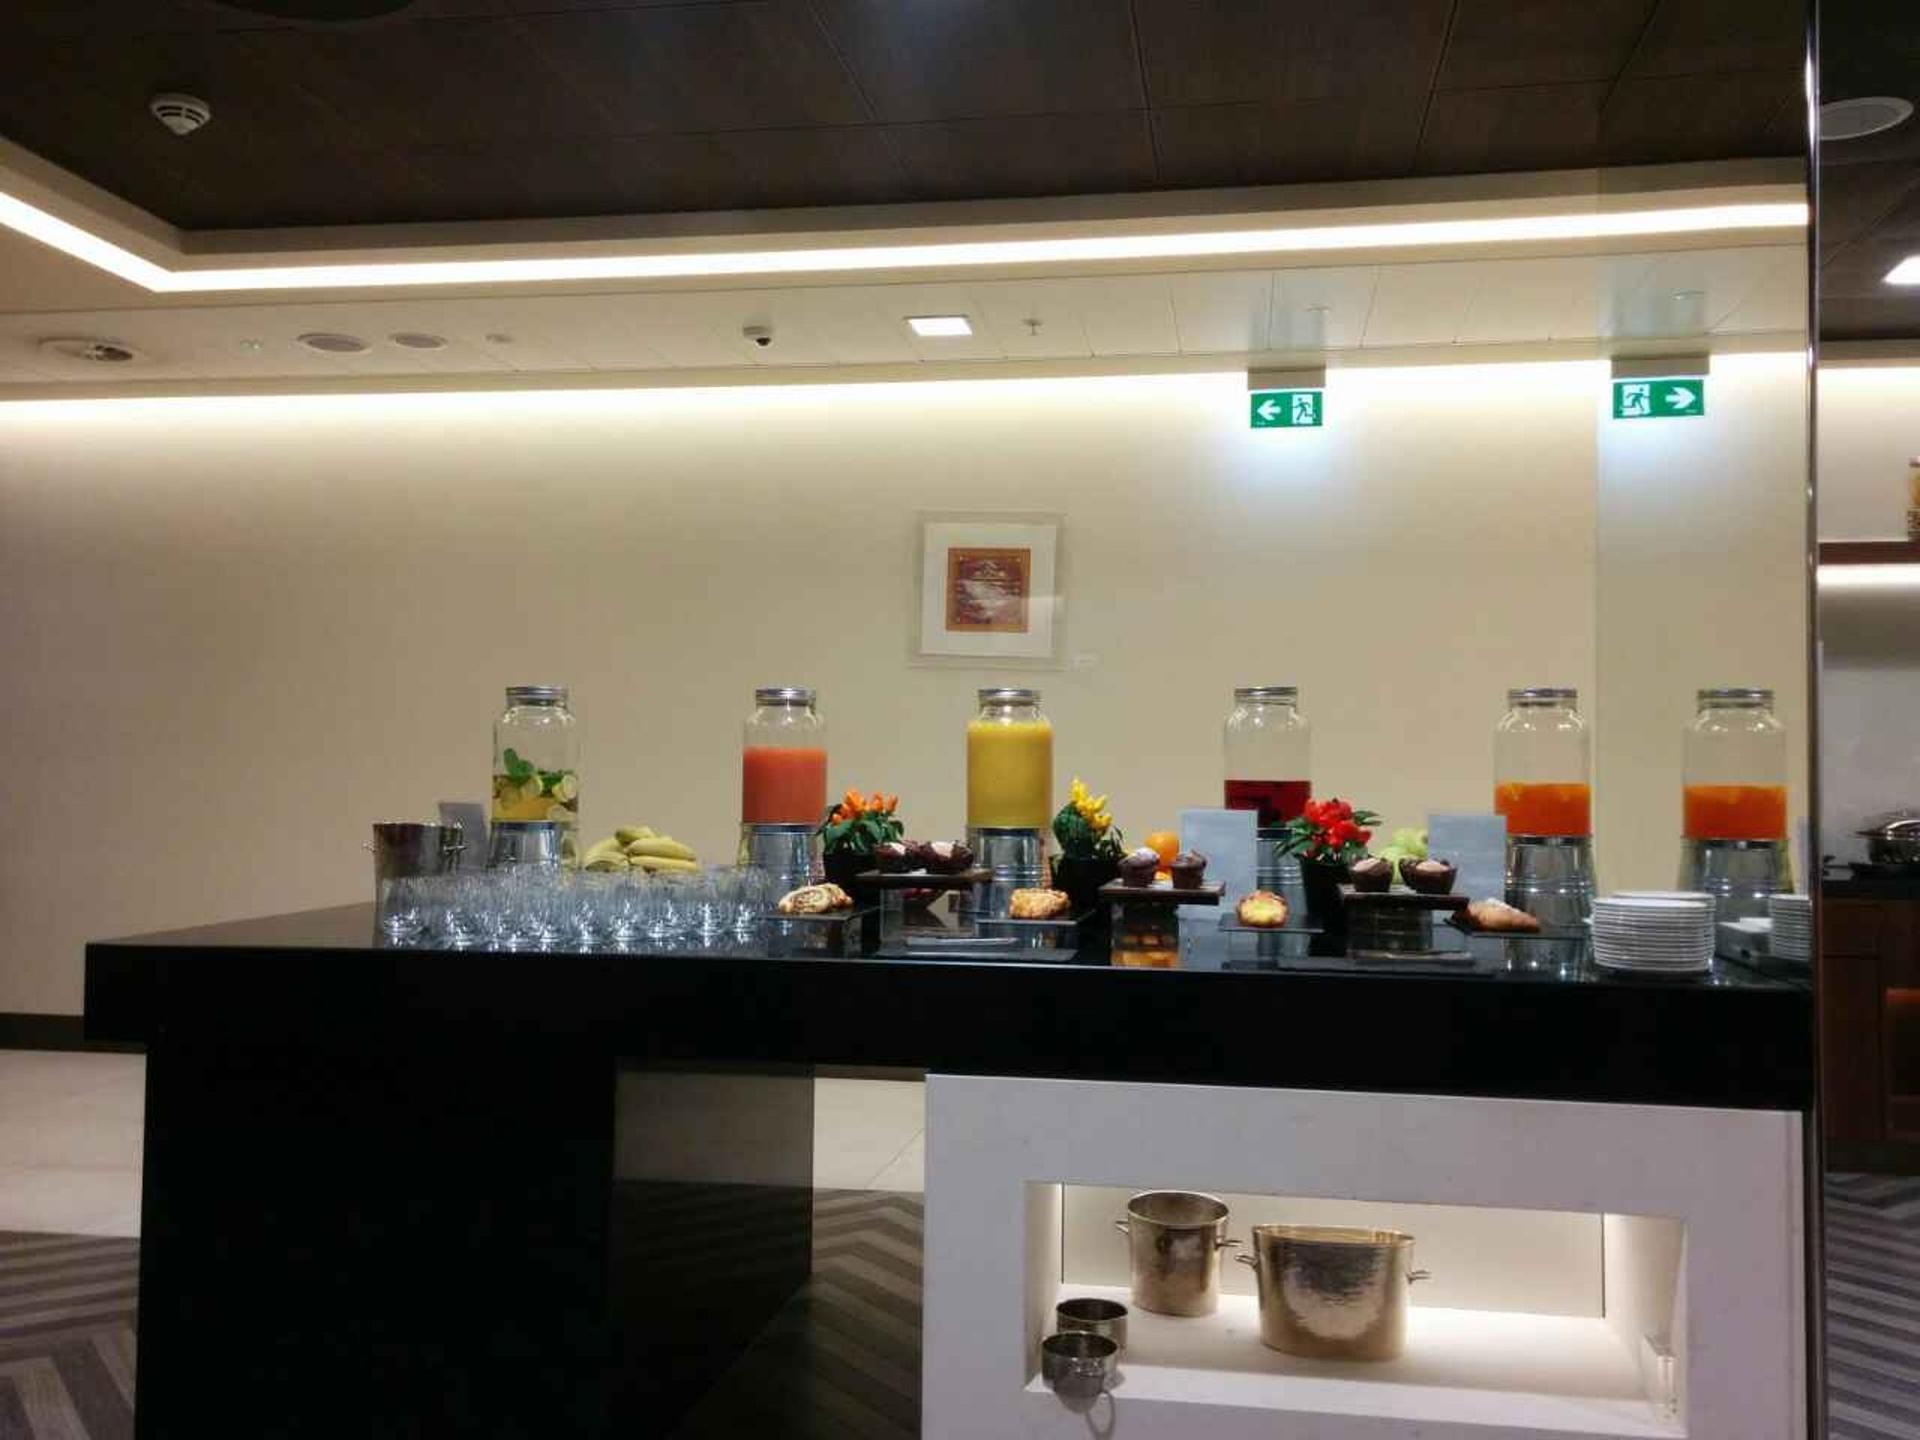 Singapore Airlines SilverKris Lounge image 19 of 36